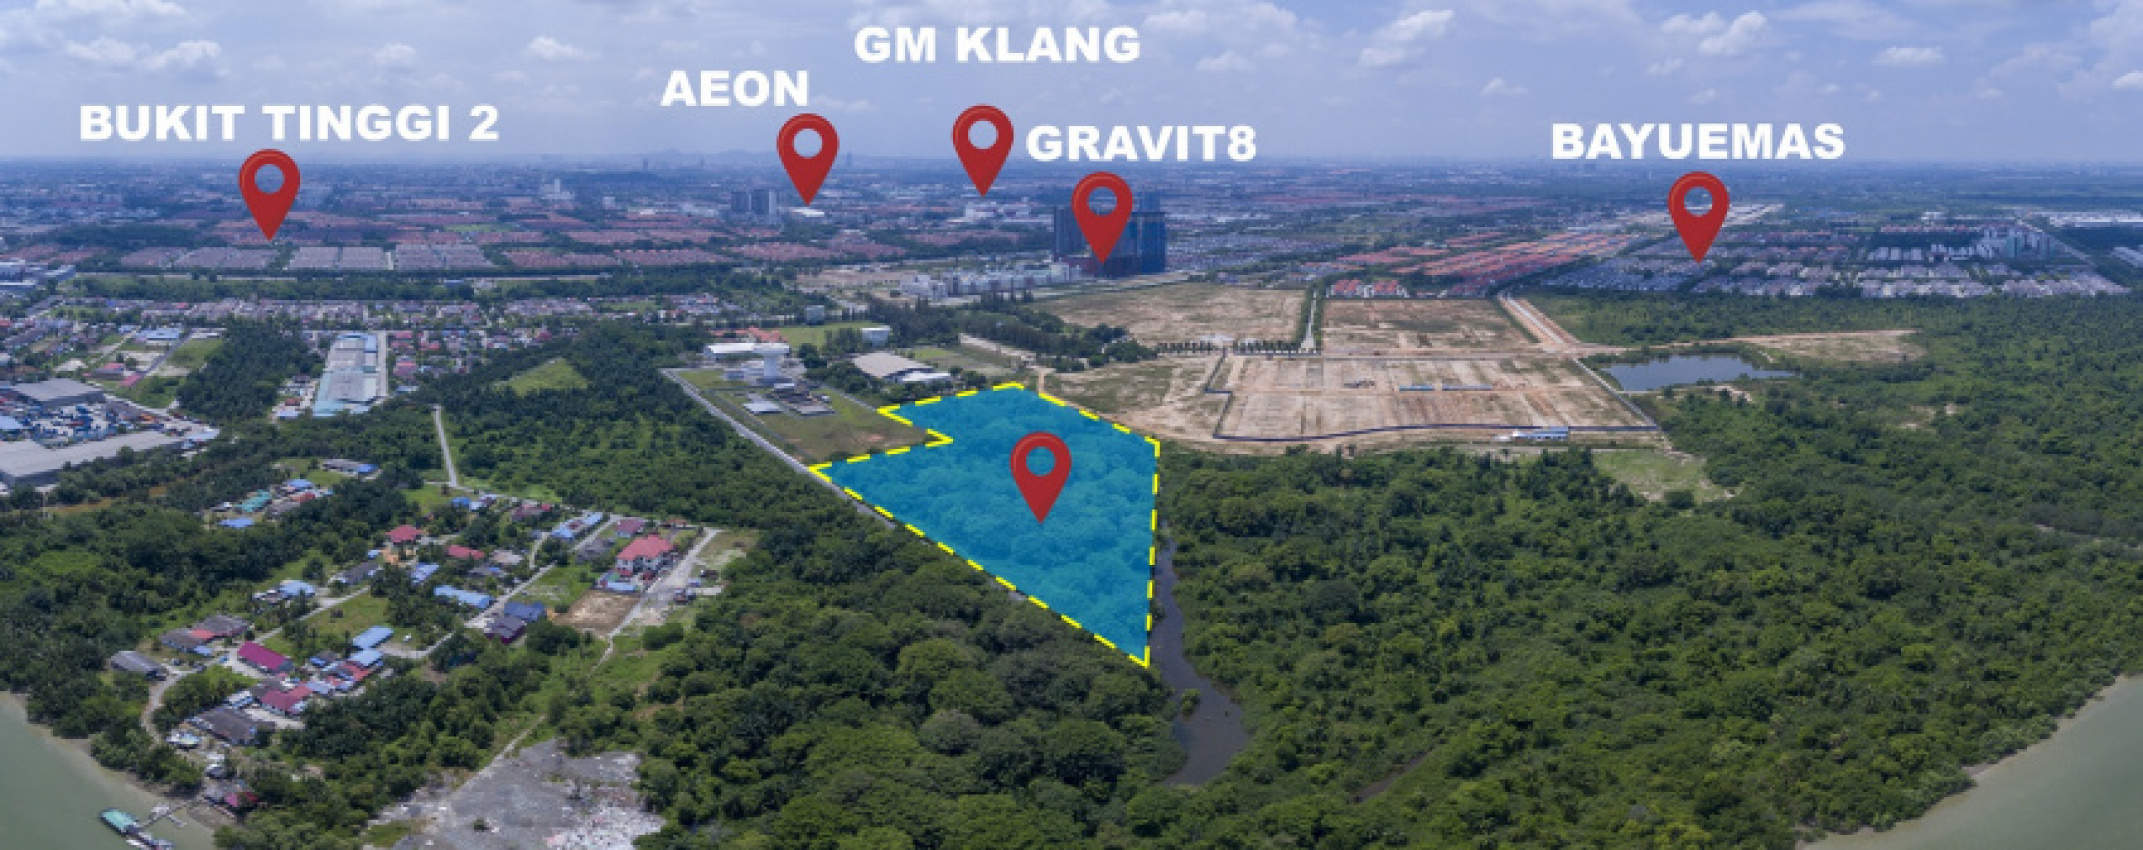 autos, cars, featured, jones lang wootton, klang, land, malaysia, sale, sdac, sime darby, sime darby auto connexion, sime darby motors, sime darby auto connexion puts up sale tender for its land in klang